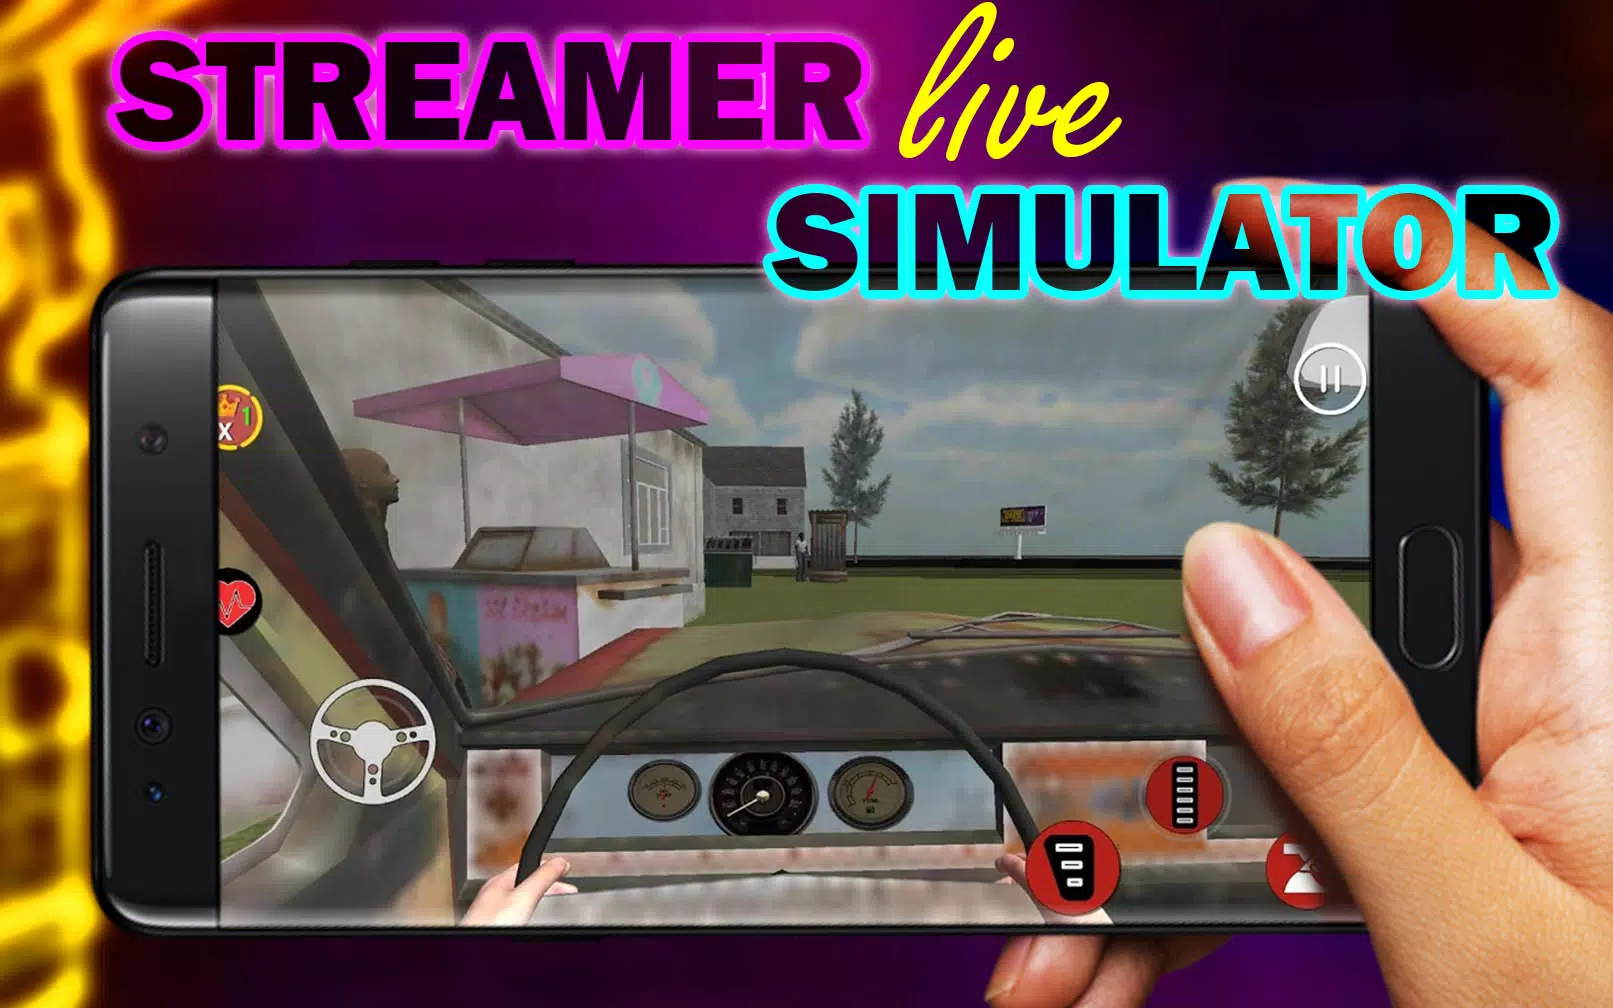 Streamer Life Simulator Hints for Android - Download